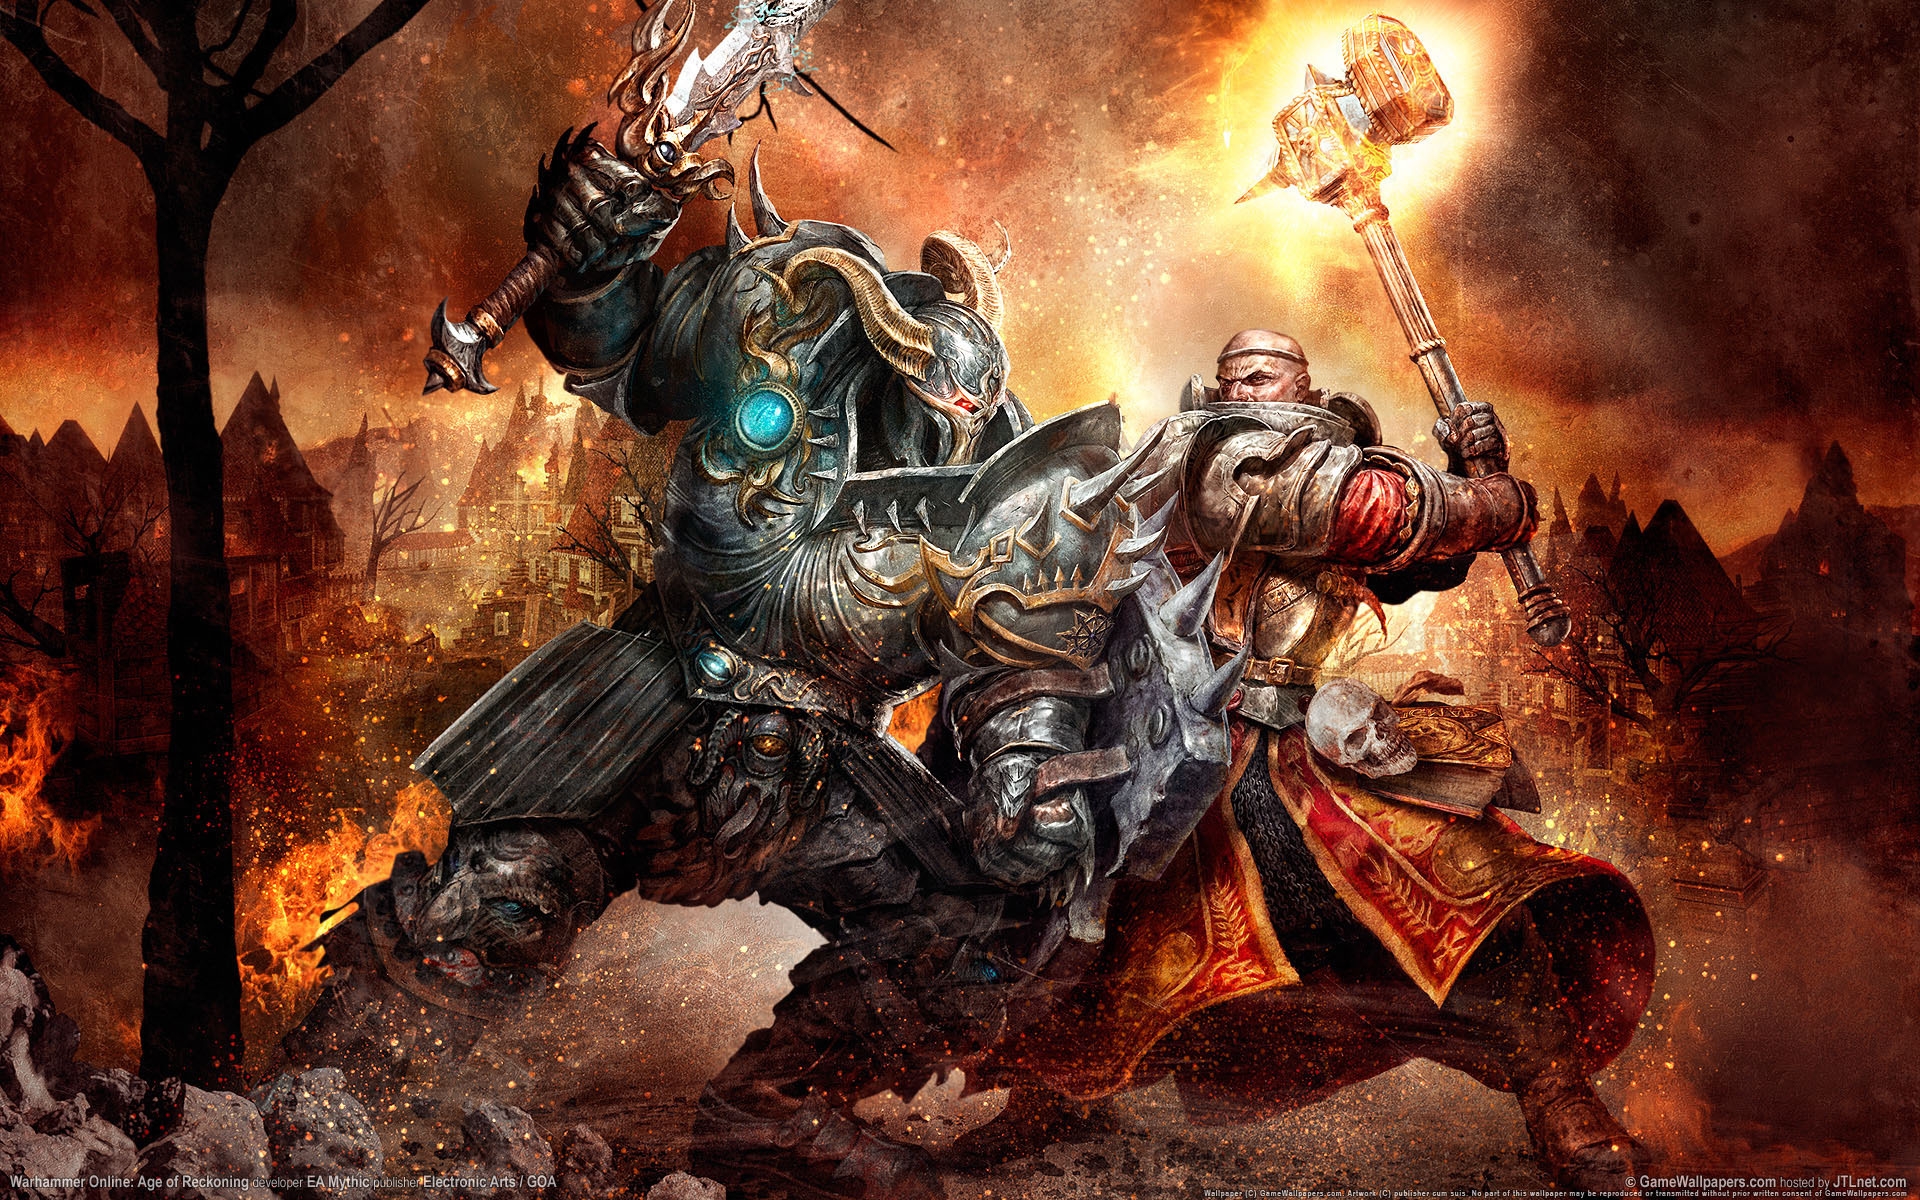 Warhammer Online Age of Reckoning for 1920 x 1200 widescreen resolution